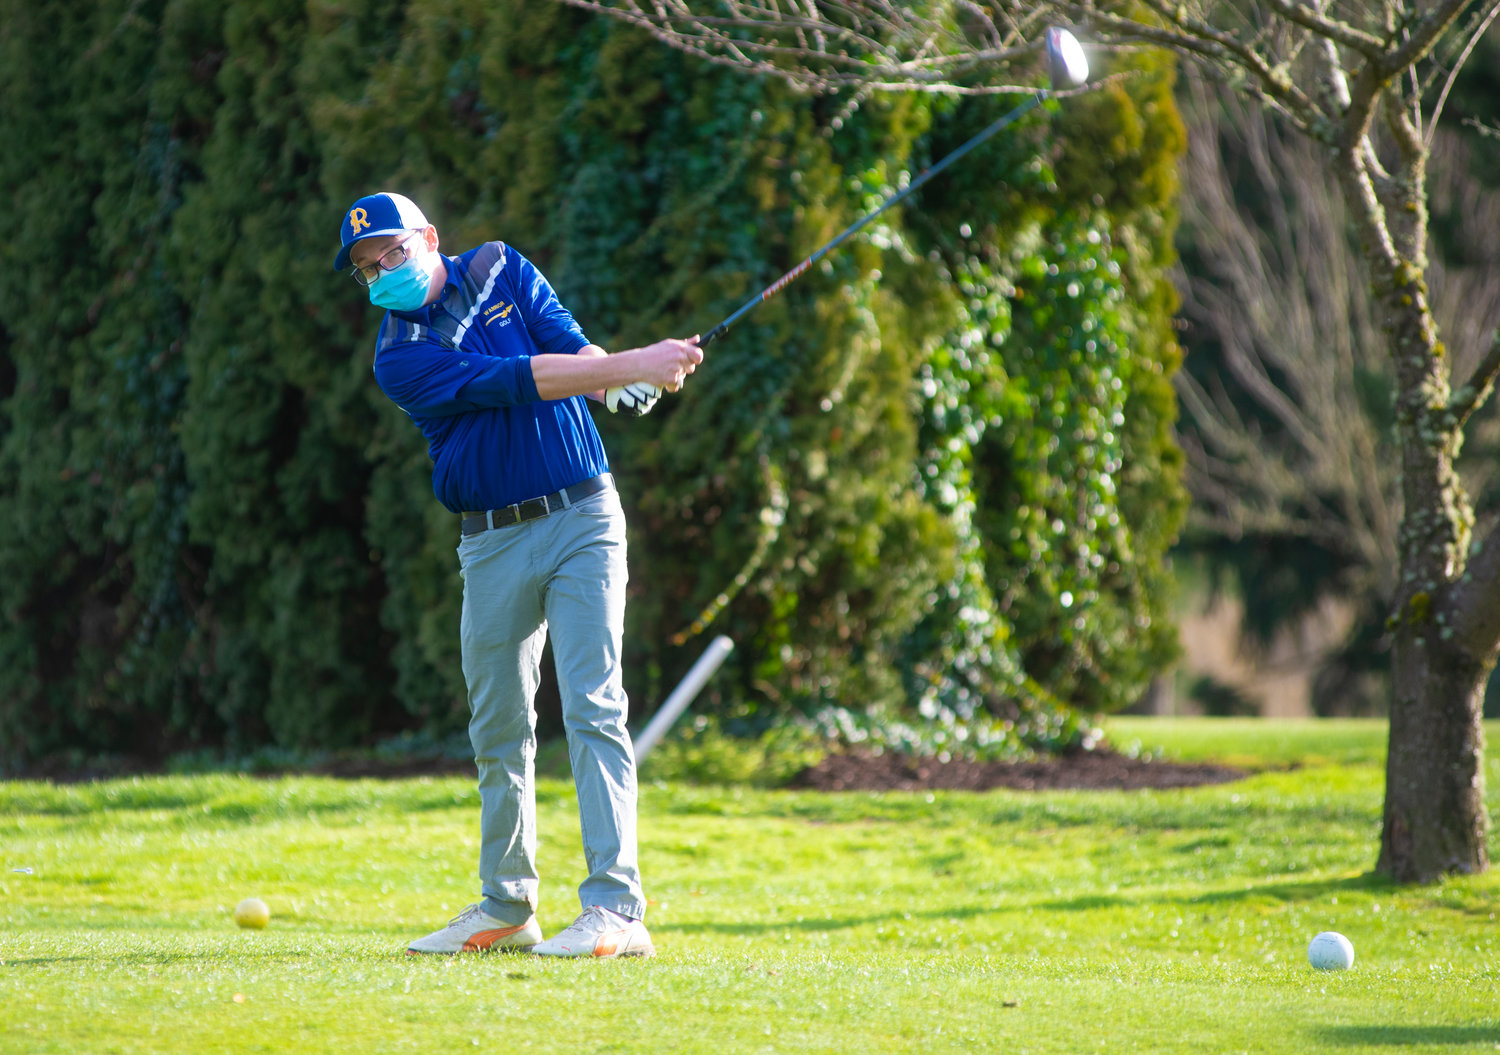 Rochester's Luke Barth tees off against Tumwater at Riverside Golf Course Wednesday.